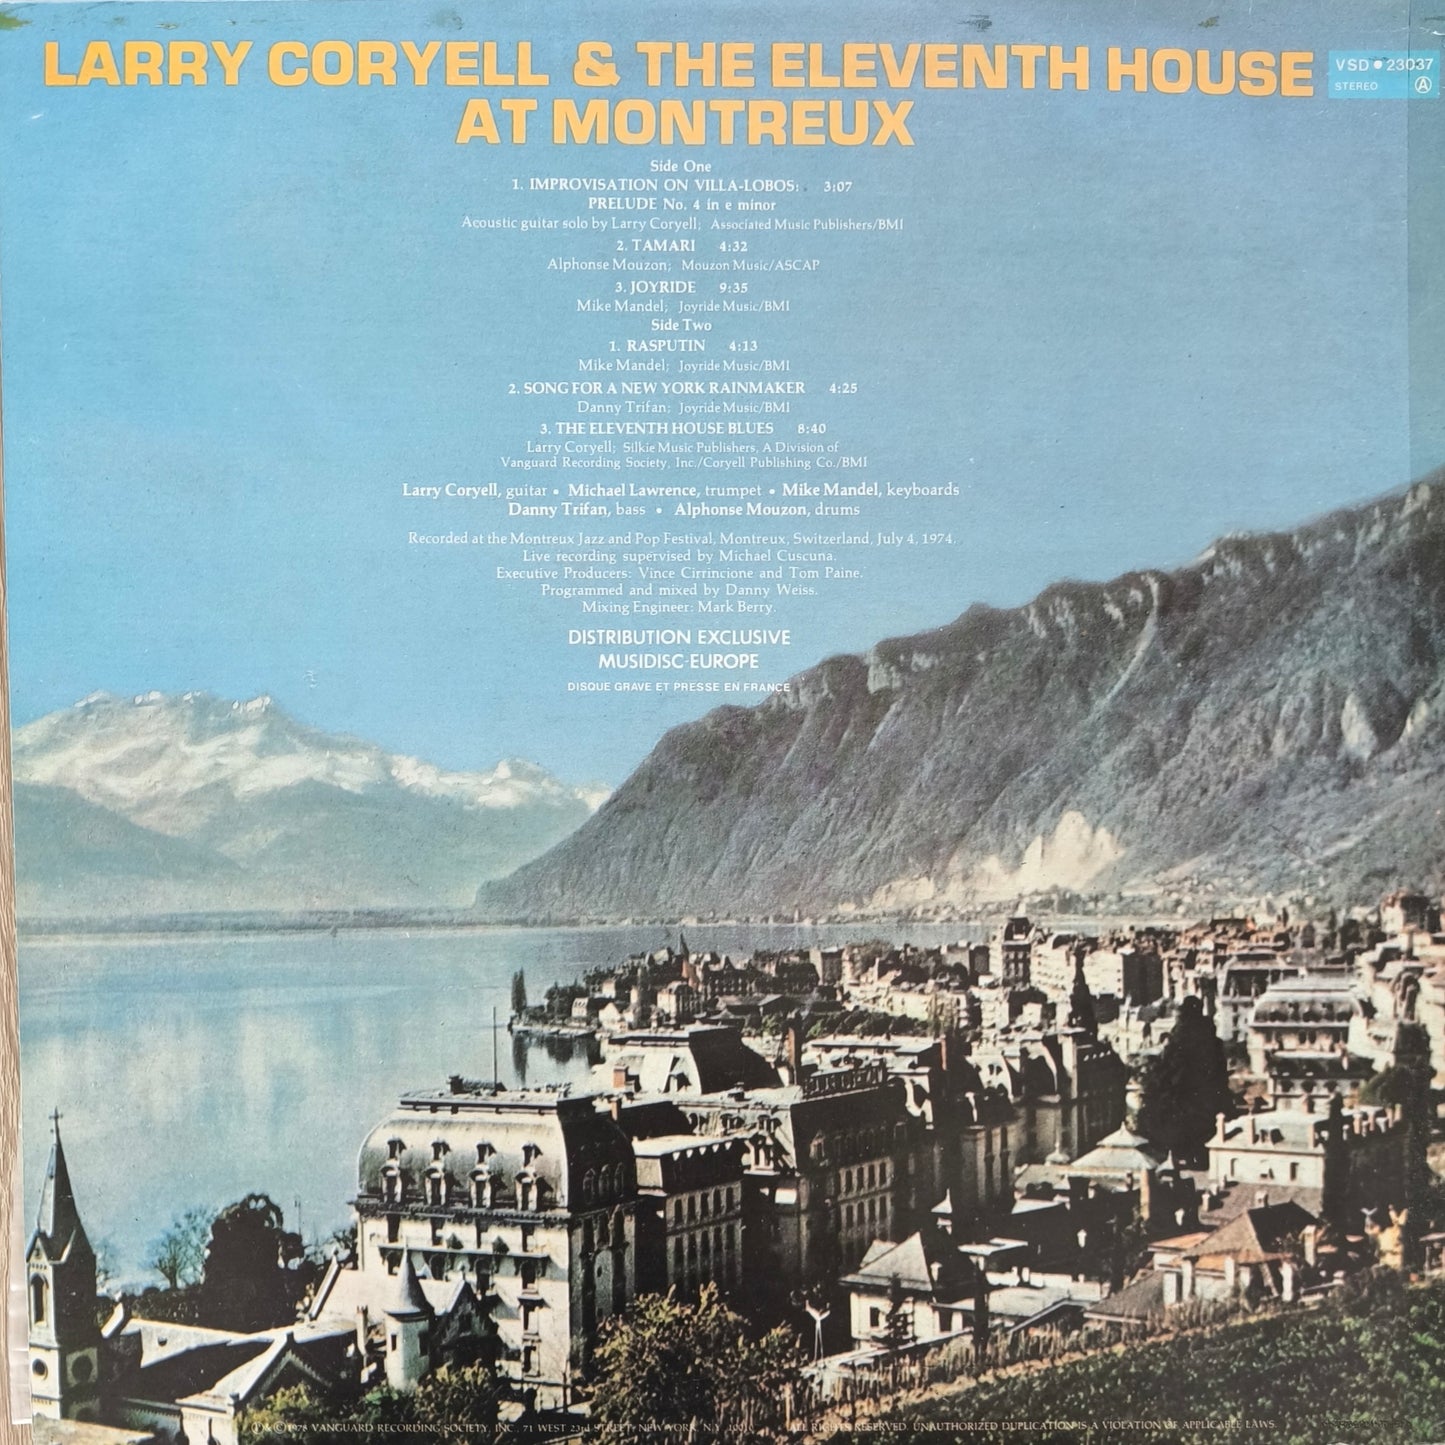 LARRY CORYELL & THE ELEVENTH HOUSE - At Montreux